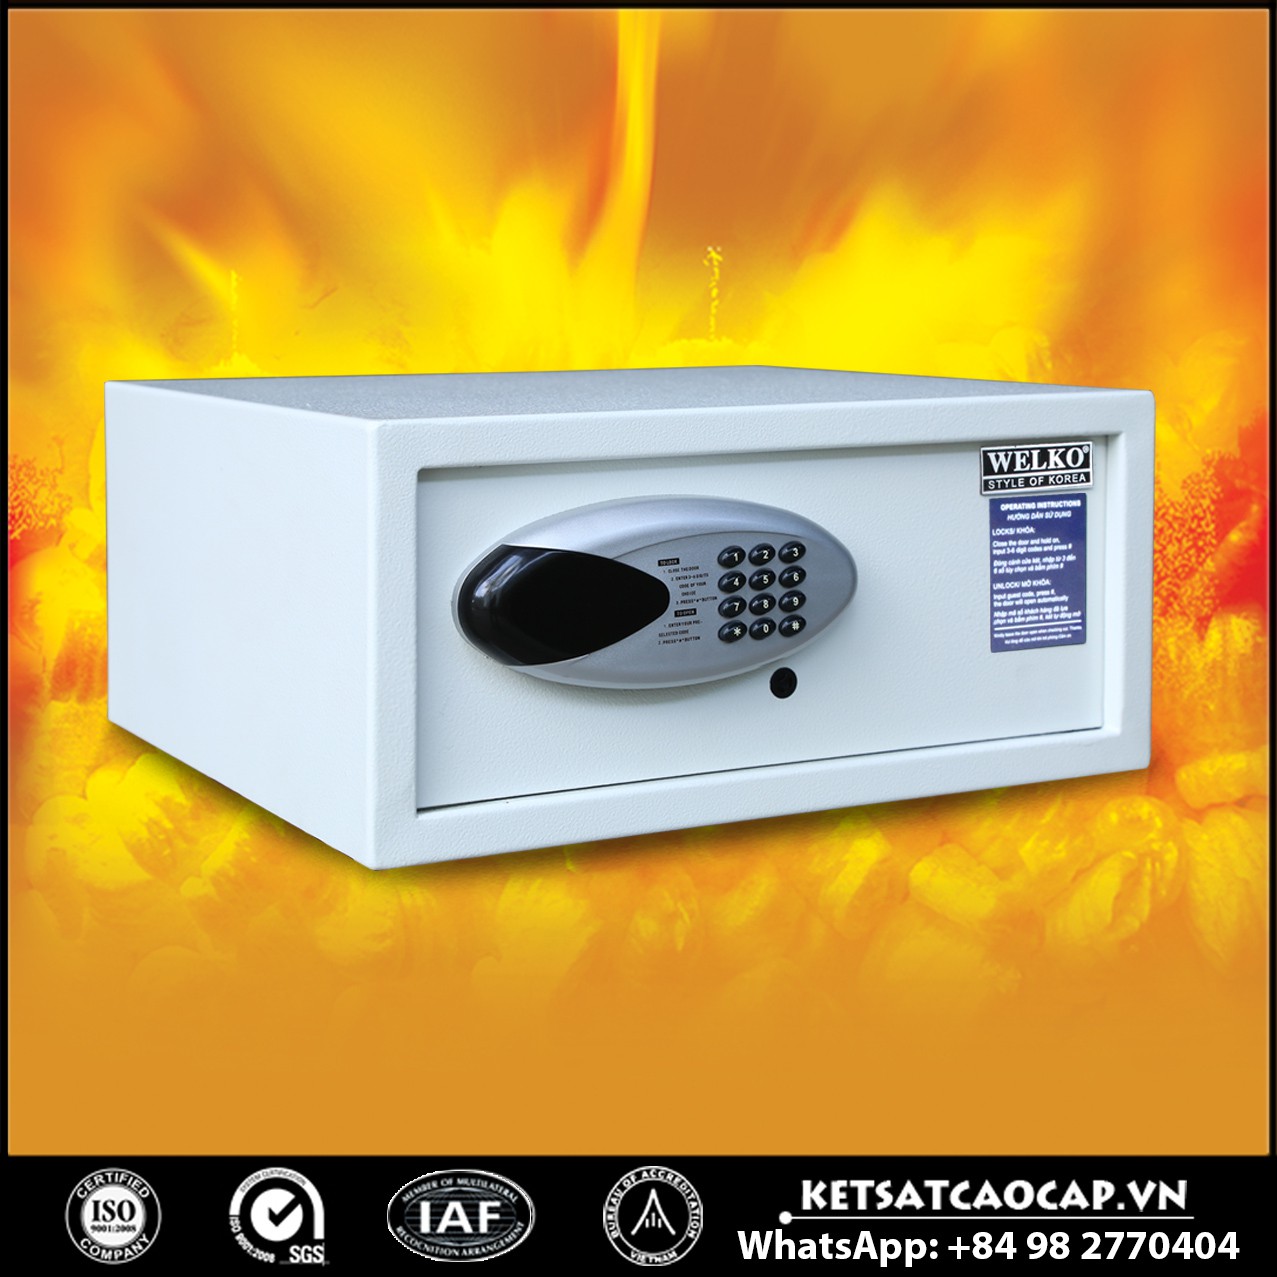 Best Sellers In Hotel Safes Manufacturers Factory